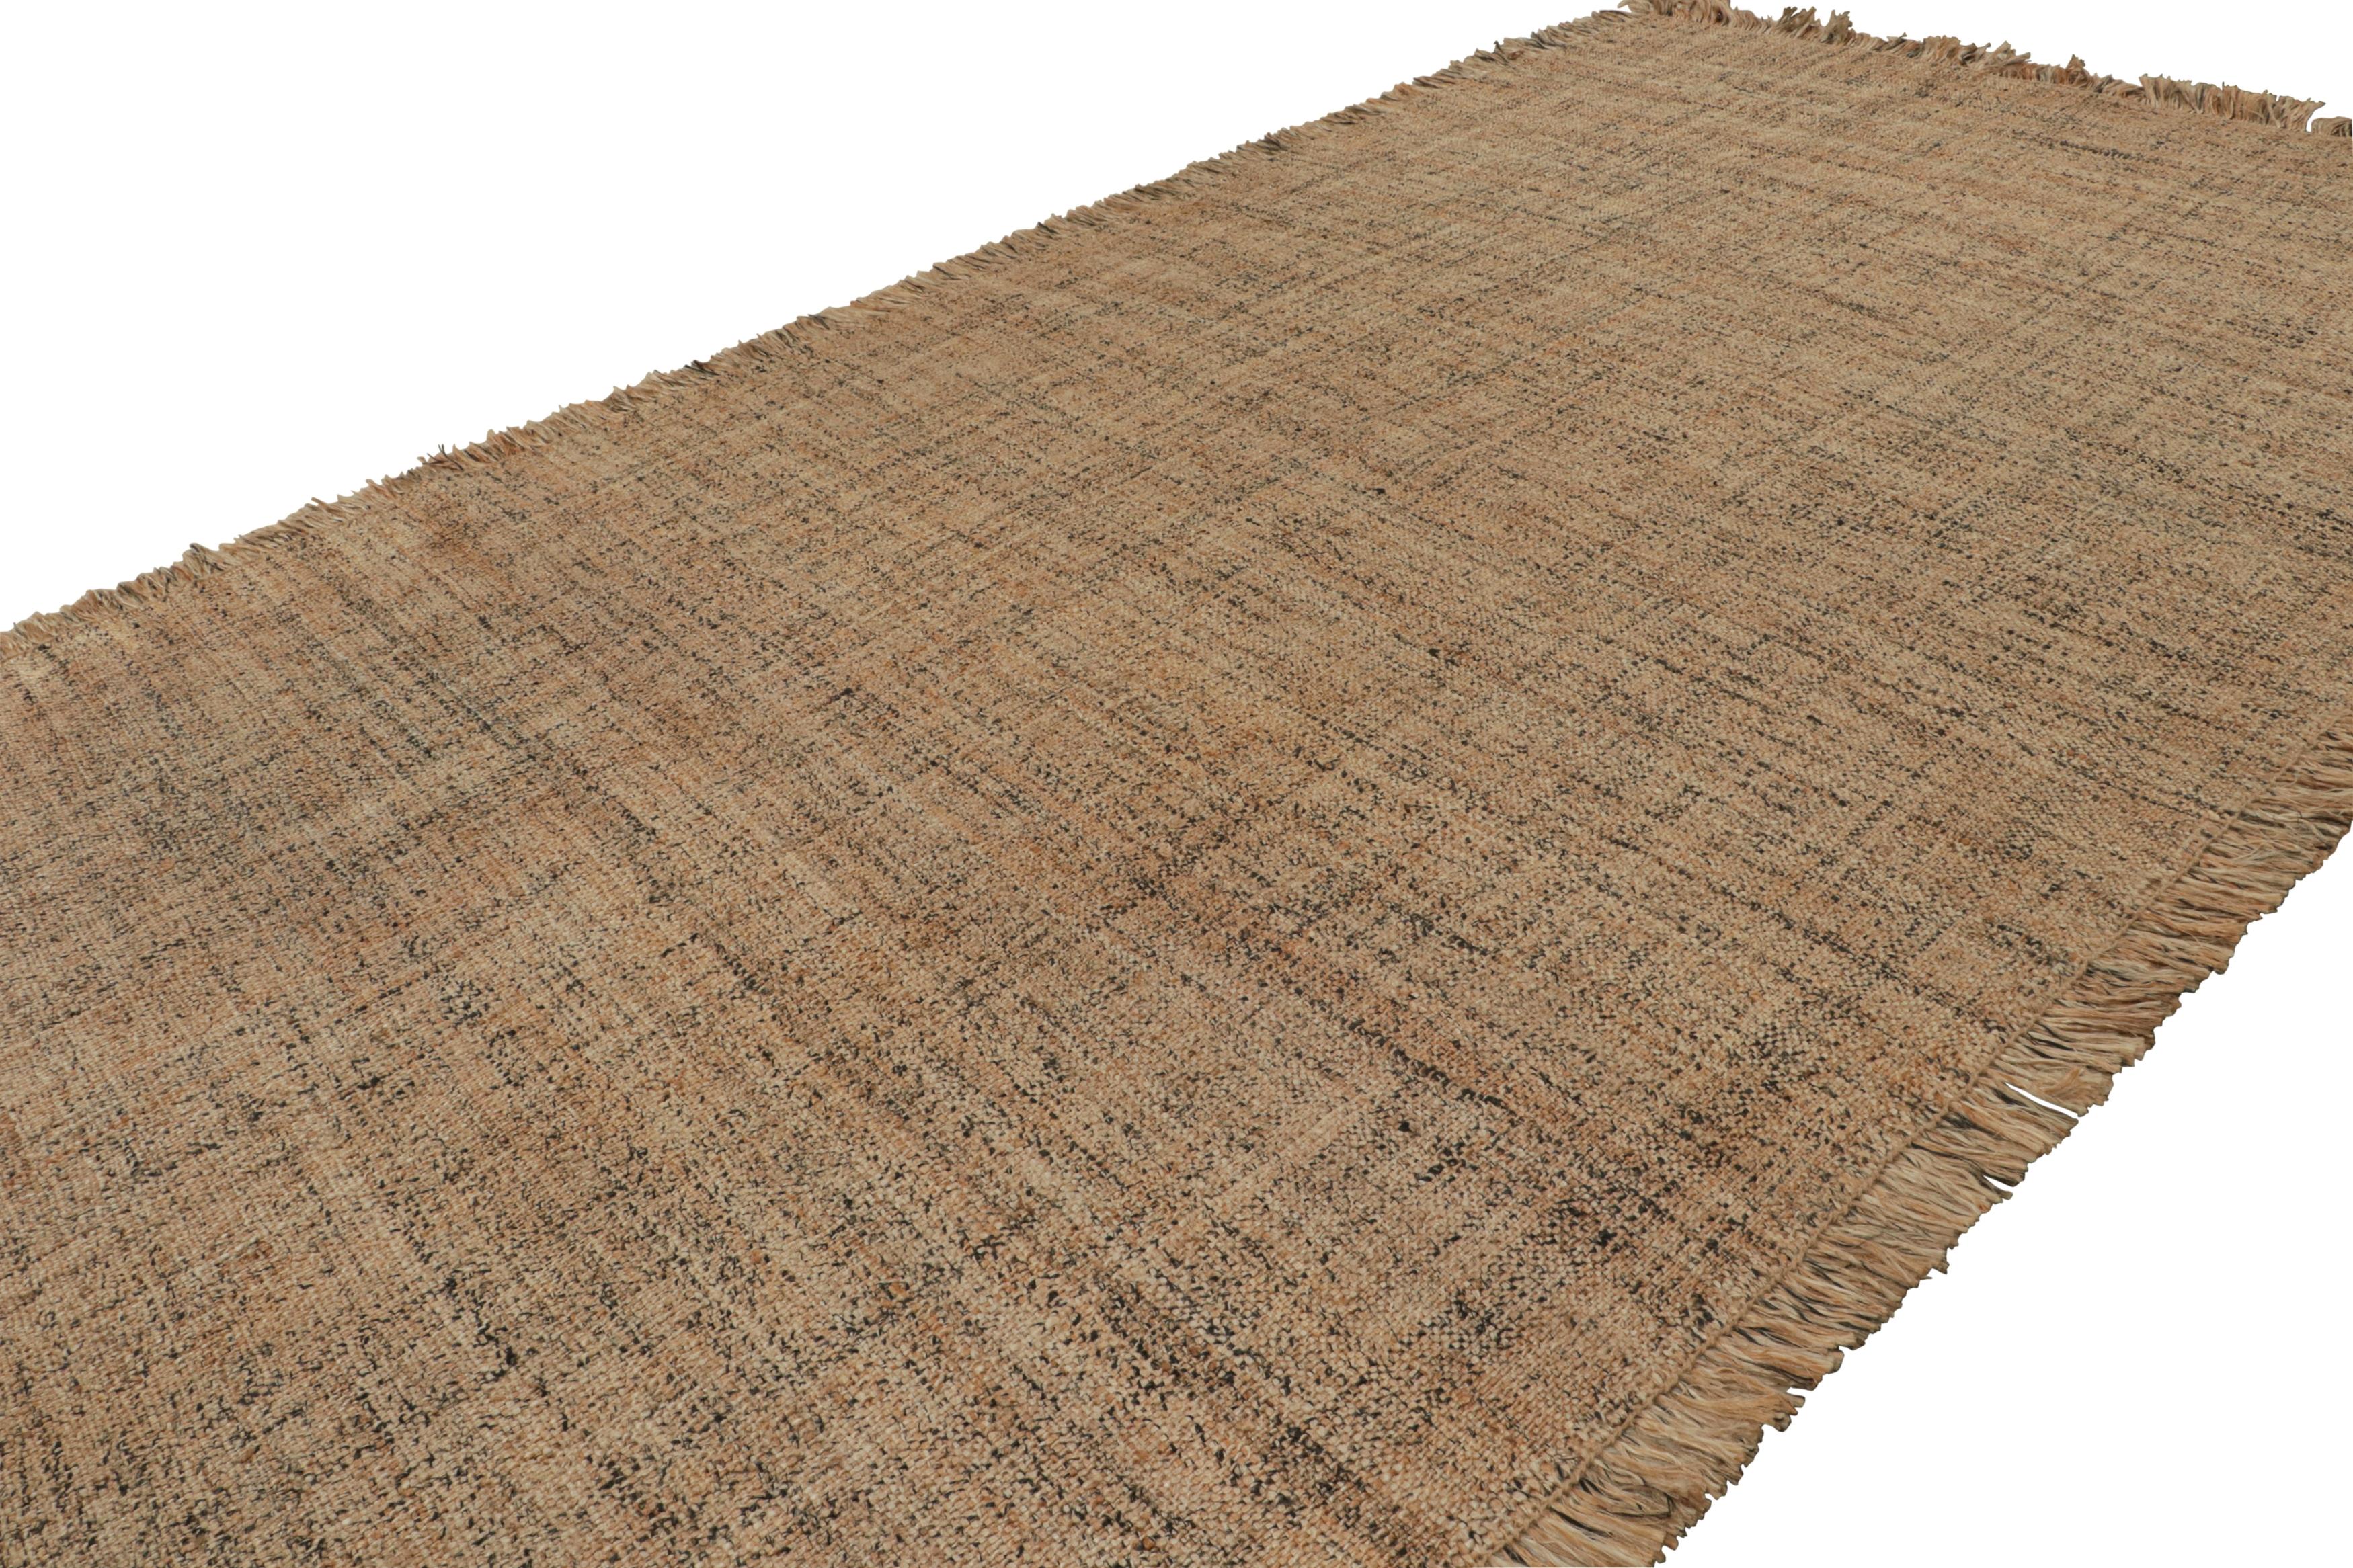 Hand-knotted in hemp, this 9x22 contemporary rug from a new all-natural, sustainable line features an exquisite beige-brown striae, making it an exciting addition to the Rug & Kilim Modern Collection. 

On the Design: 

Admirers of the craft may